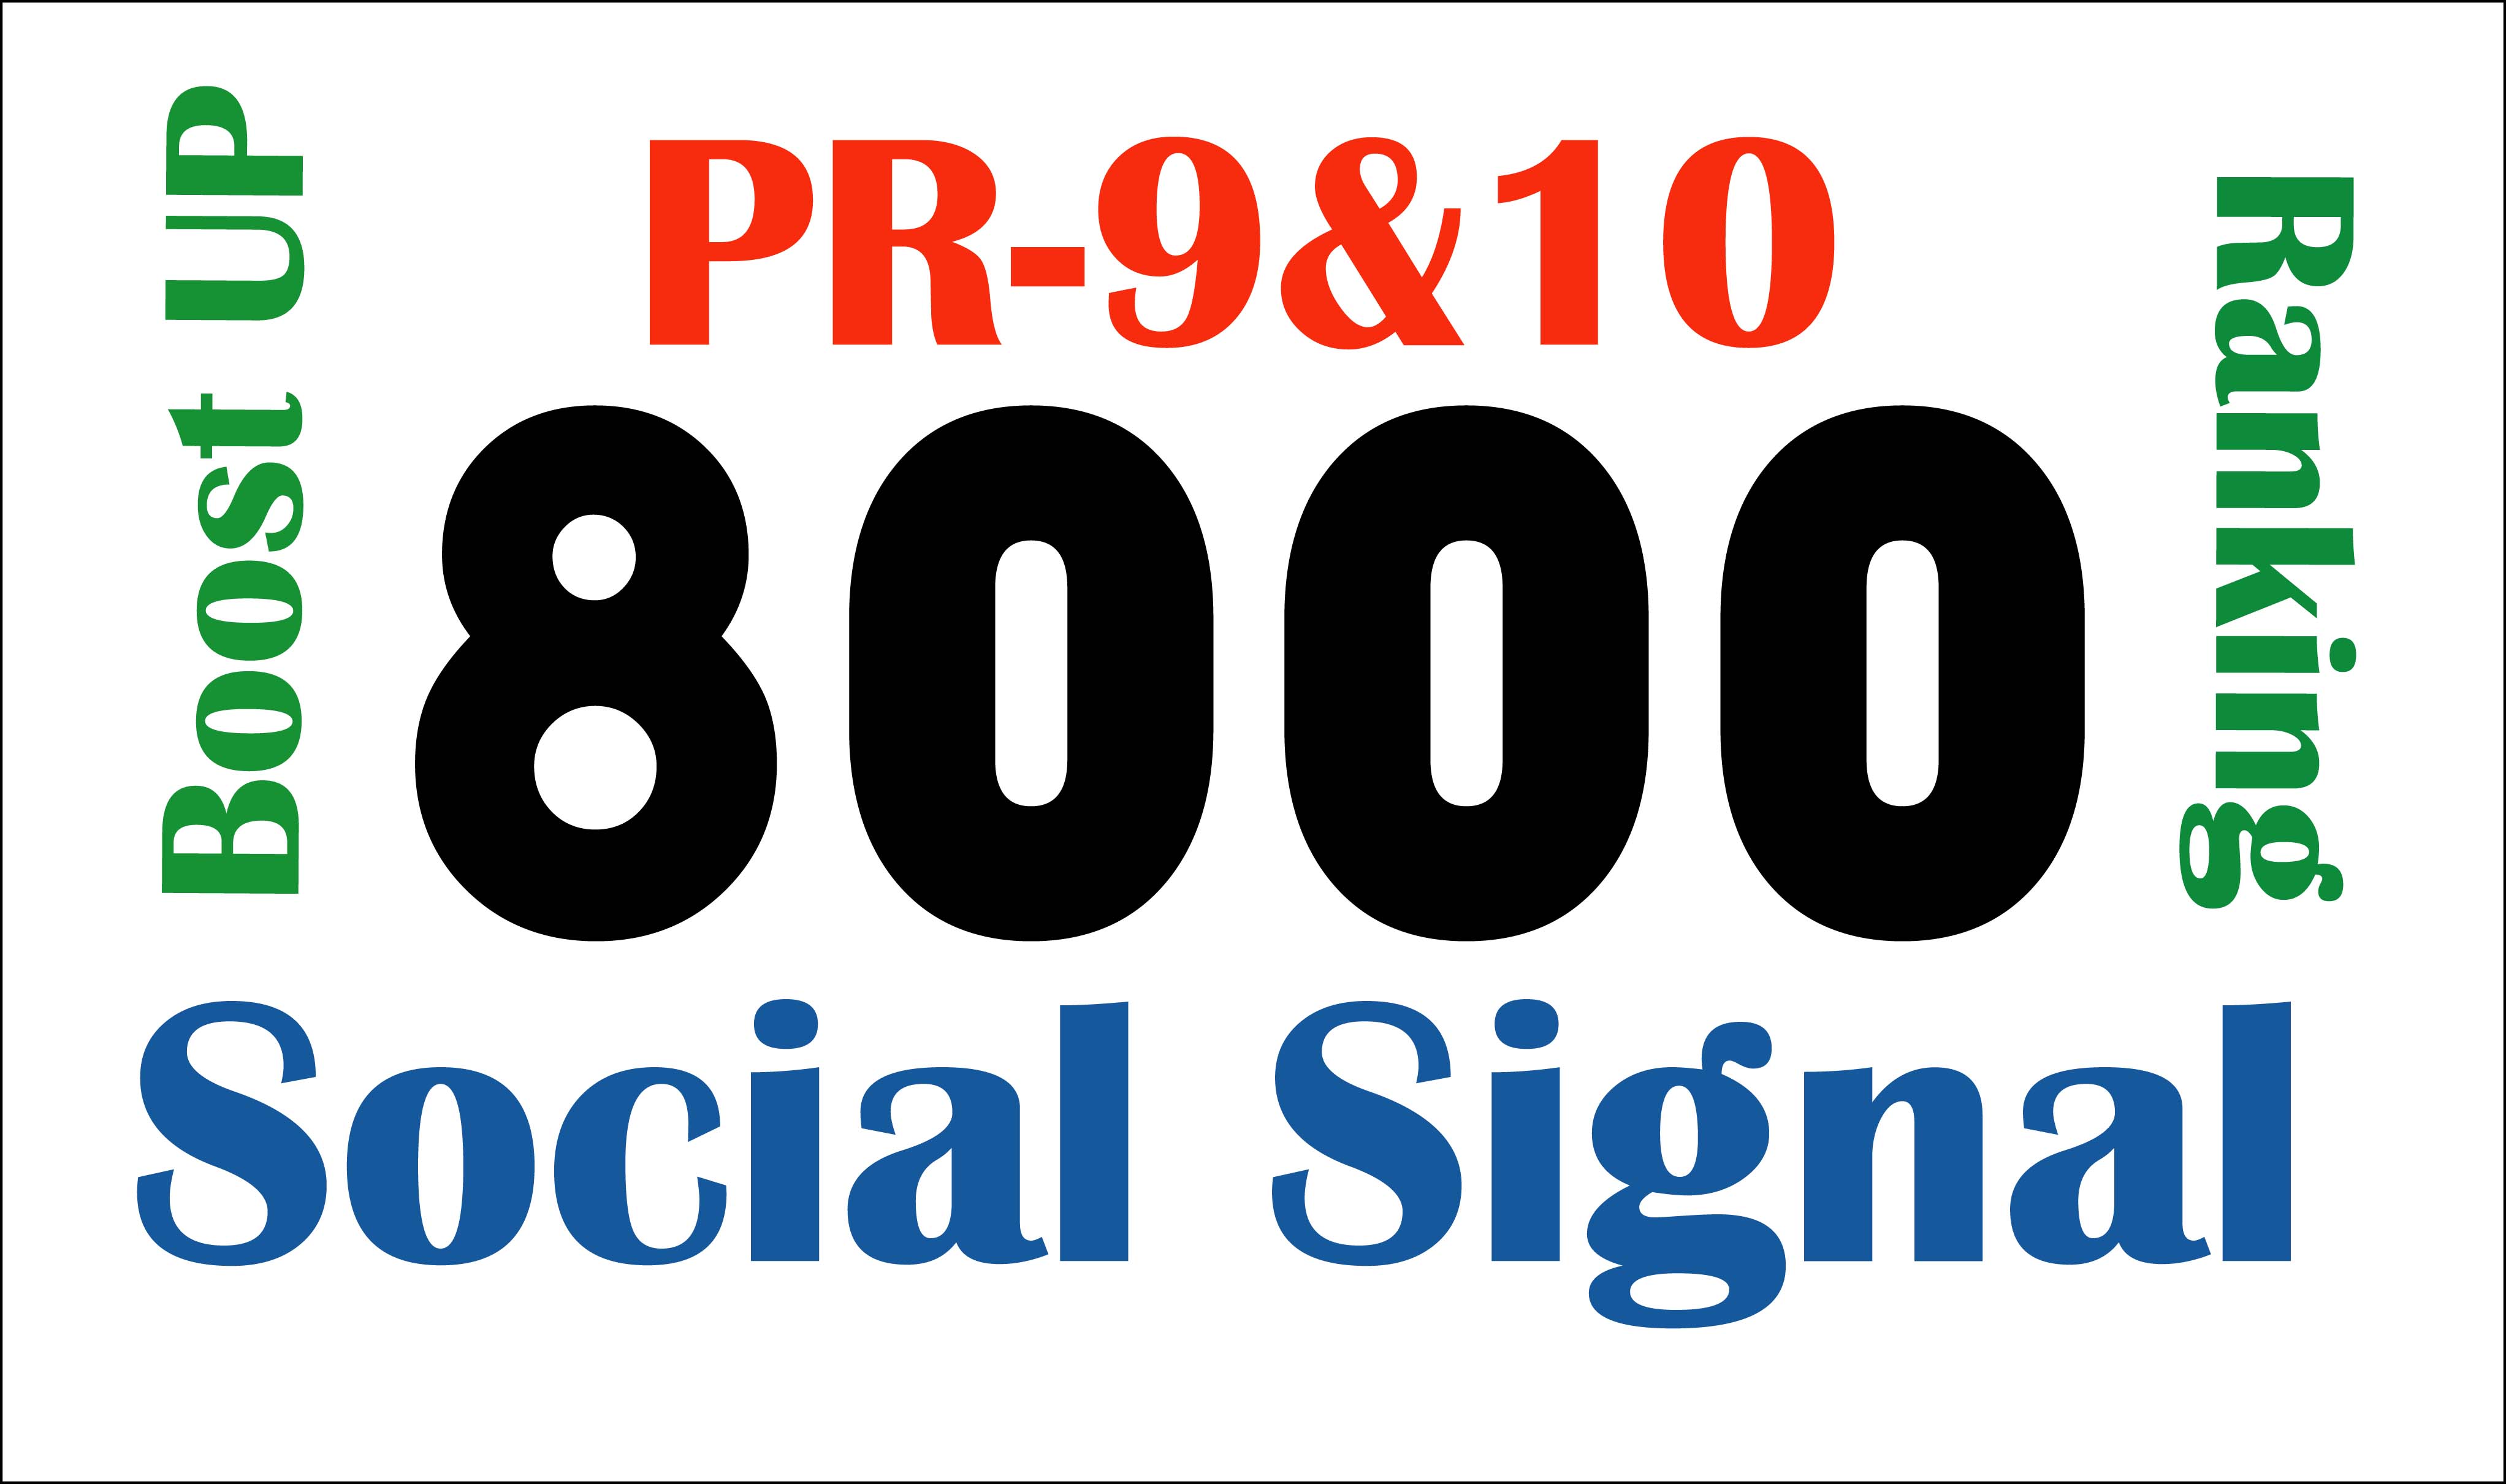 Drip Feed quality 8000 (PR-10 &9) social signals to boost your website